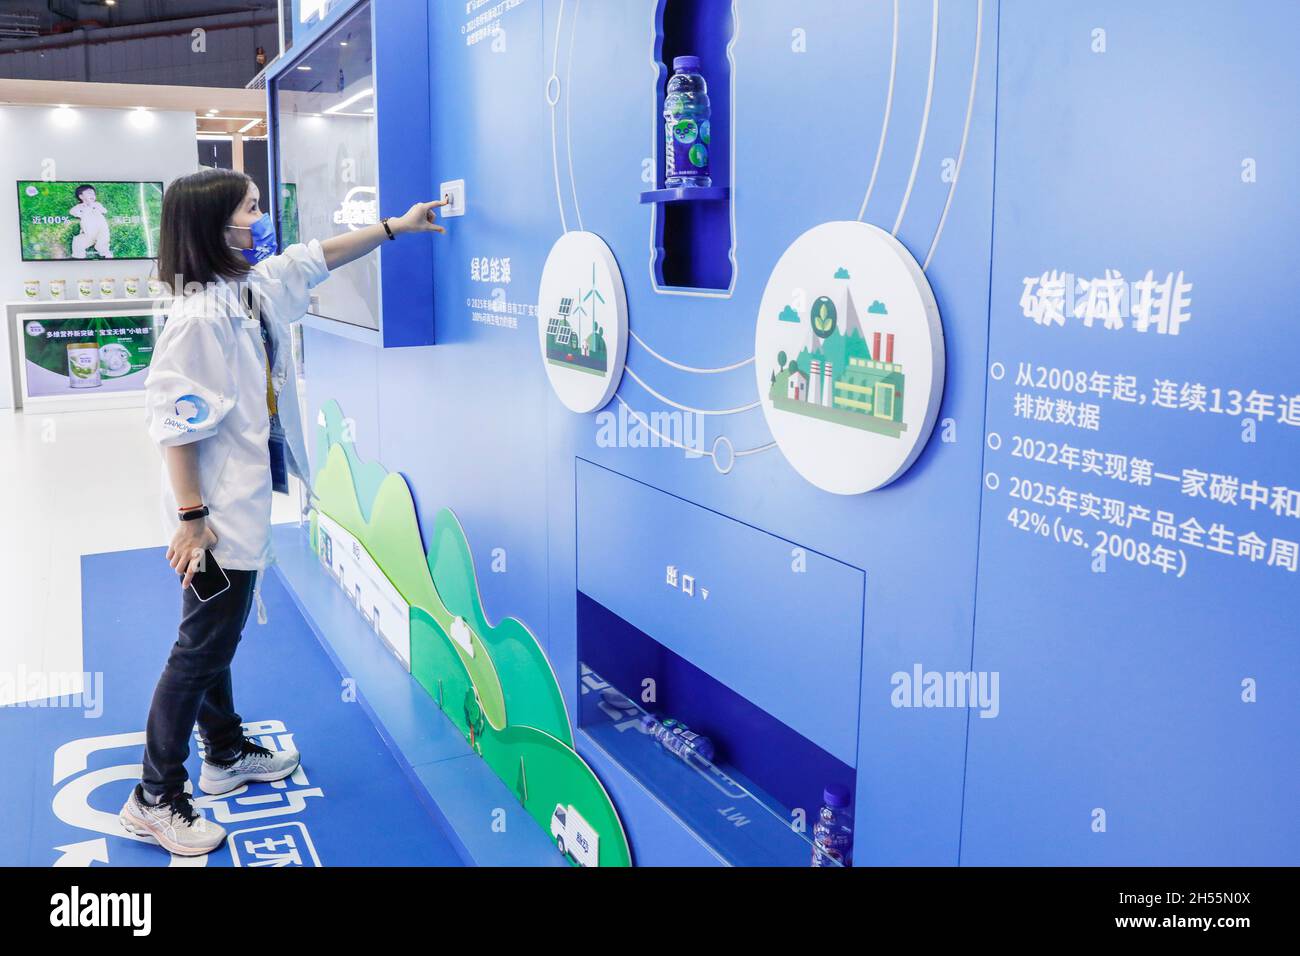 Shanghai. 6th Nov, 2021. A staff member demonstrates how to use an intelligent plastic bottle recycling machine at the Food and Agricultural Products Exhibition Area of the 4th China International Import Expo (CIIE) in east China's Shanghai, Nov. 6, 2021. The intelligent plastic bottle recycling machine at Danone booth can recycle plastic bottles thrown away by visitors and turns them into soft fabrics. Fabrics made from 16 bottles can make a coat. Credit: Zhang Yuwei/Xinhua/Alamy Live News Stock Photo